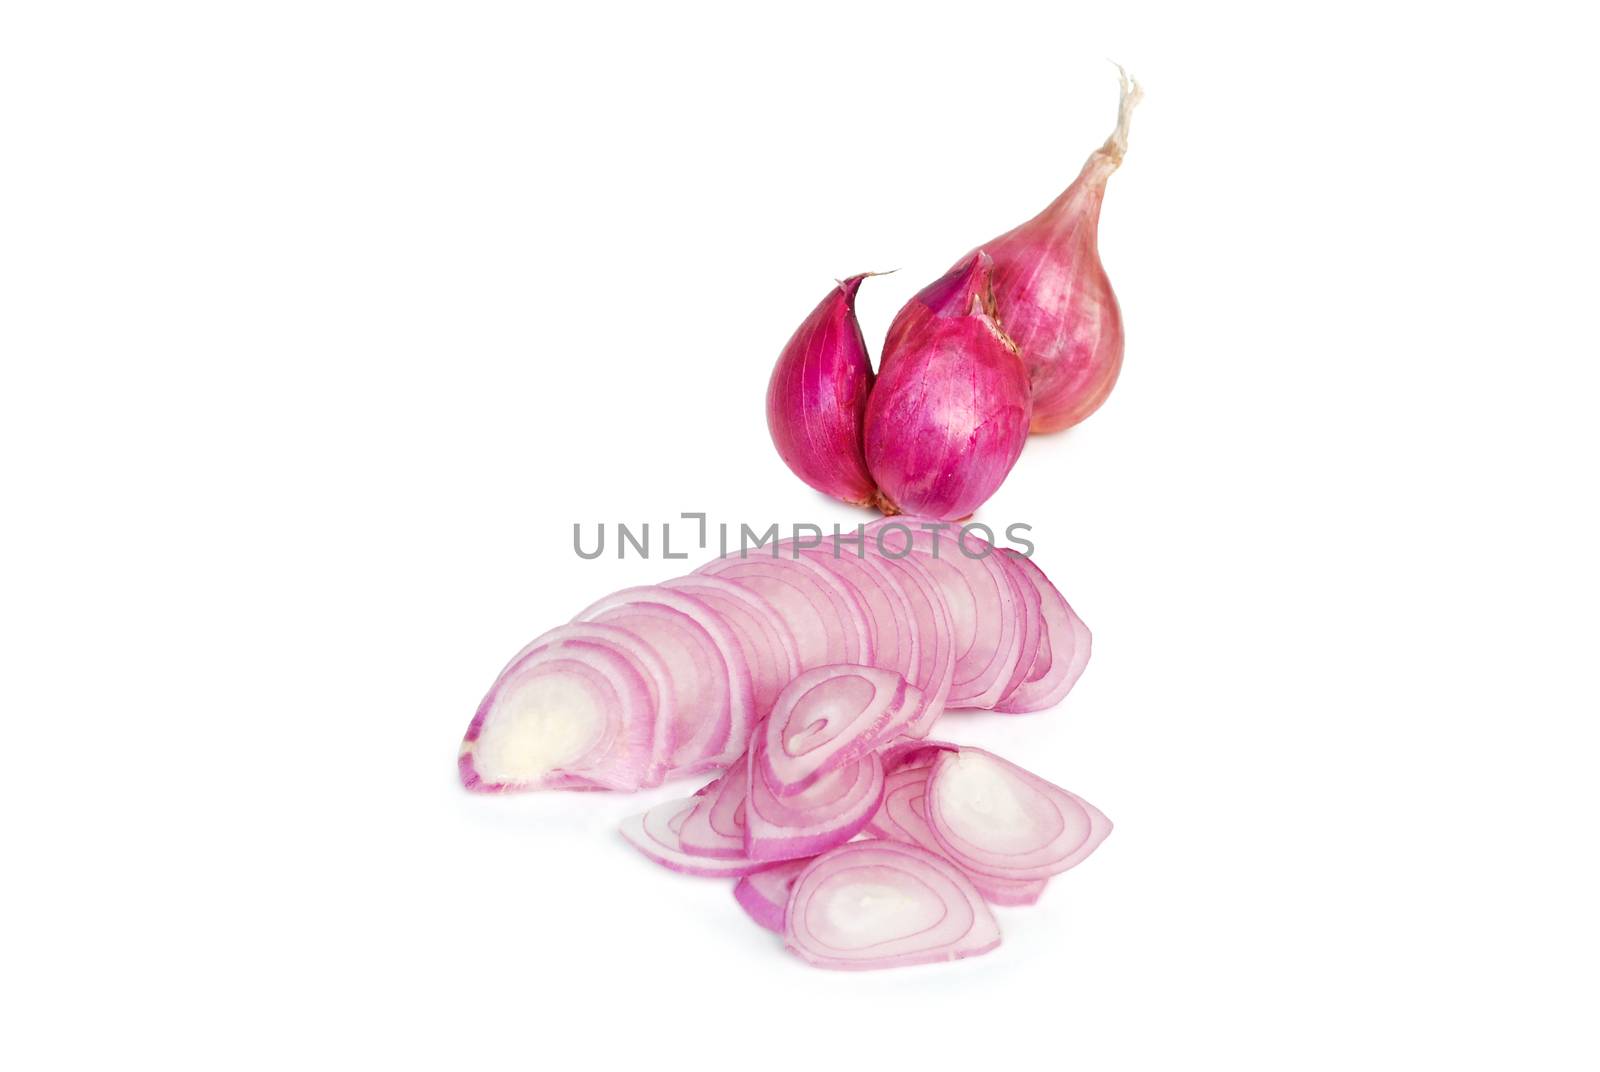 Shallot makes appetite, helps to warm the body.Shallot on white background.With Clipping Path.